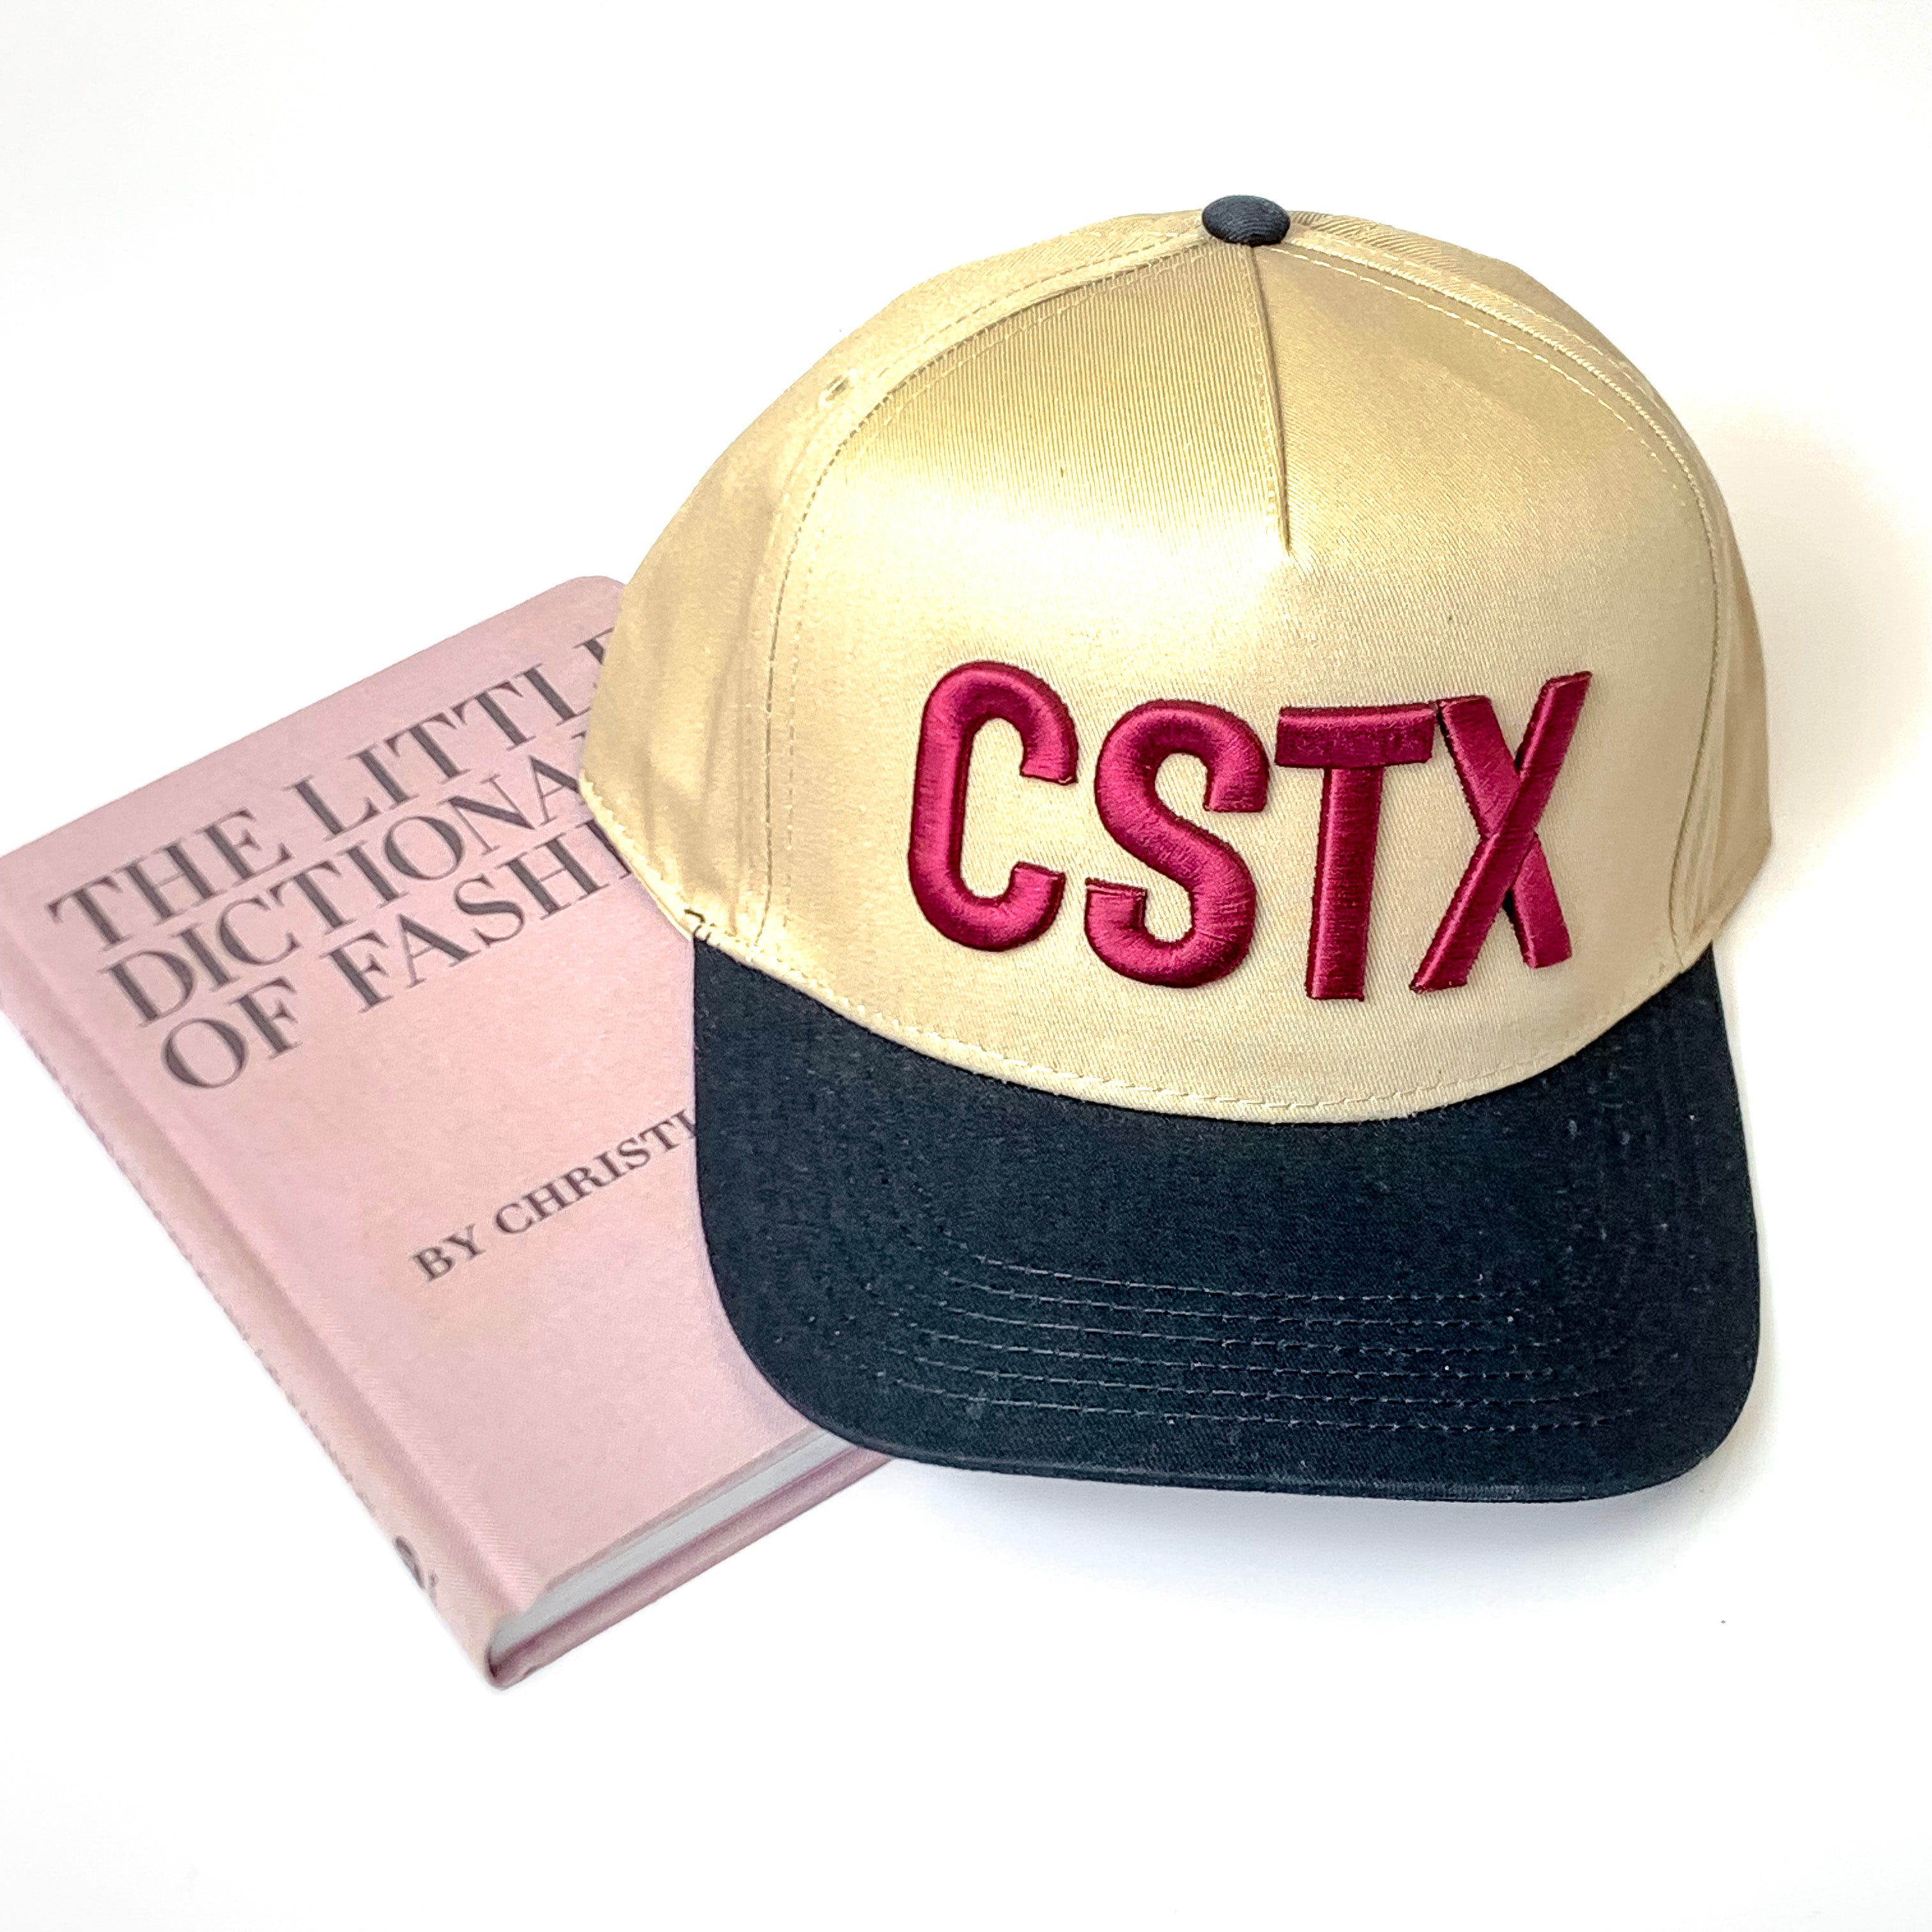 CSTX Khaki and Black Trucker Hat with Maroon Embroidered Puff Lettering - Giddy Up Glamour Boutique